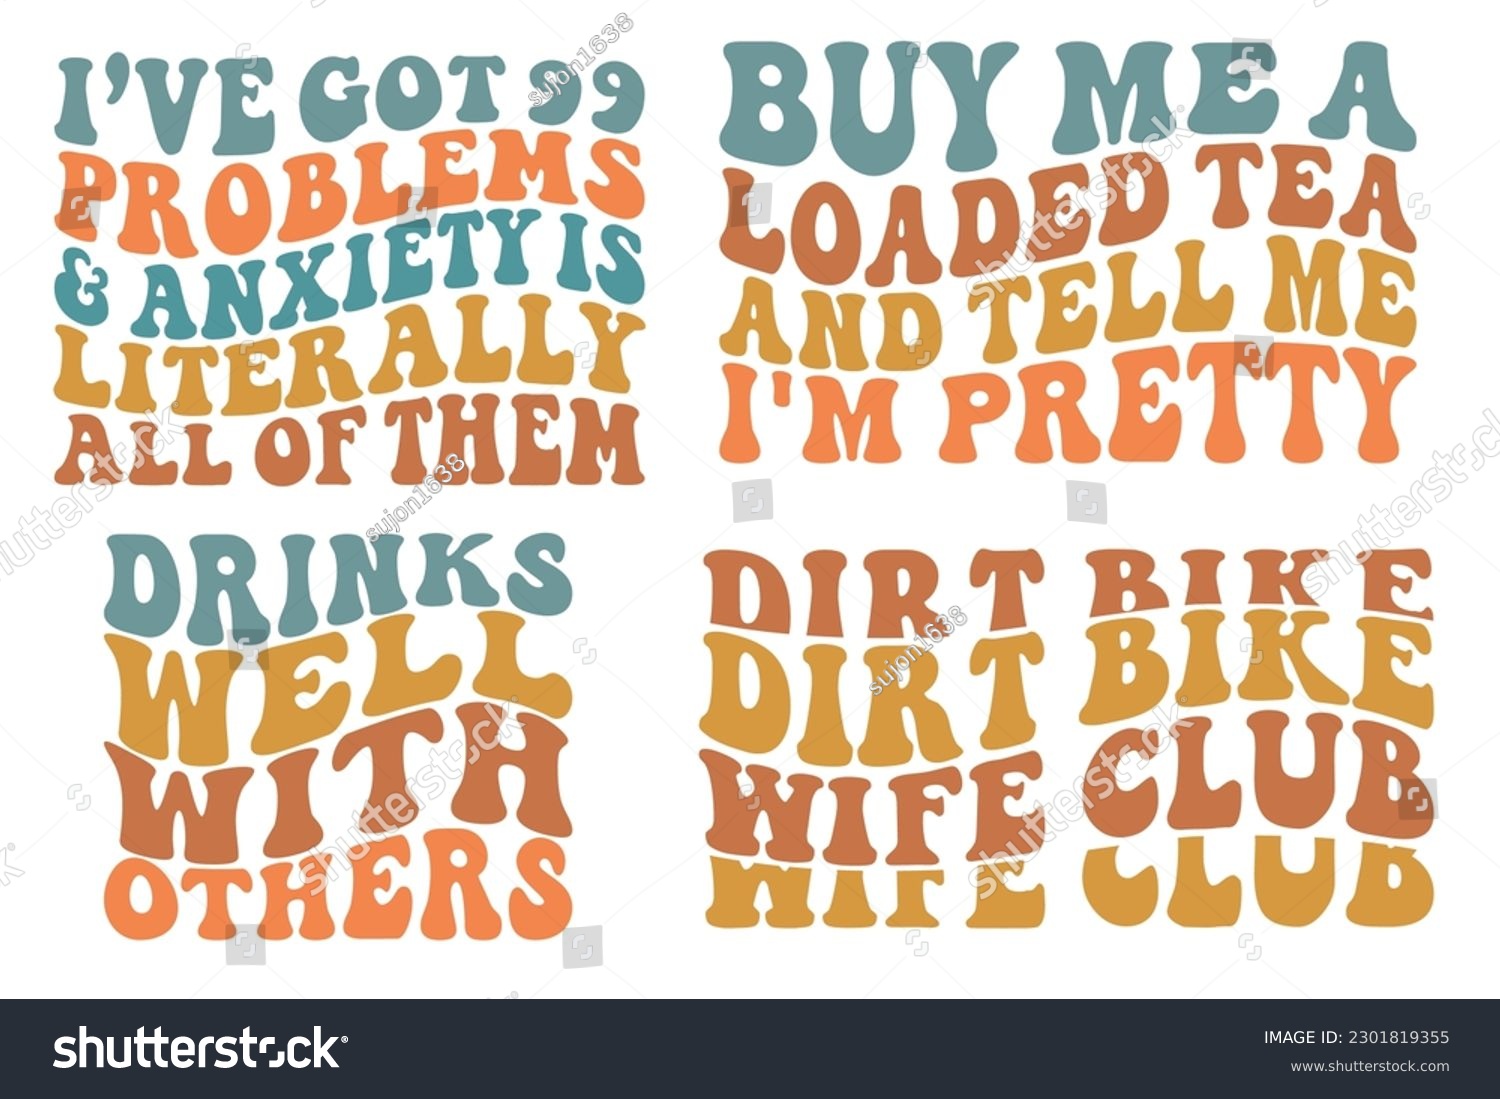 SVG of I've got 99 problems, and anxiety is liter ally all of them, drinks well with others, dirt bike wife club wavy SVG bundle T-shirt svg